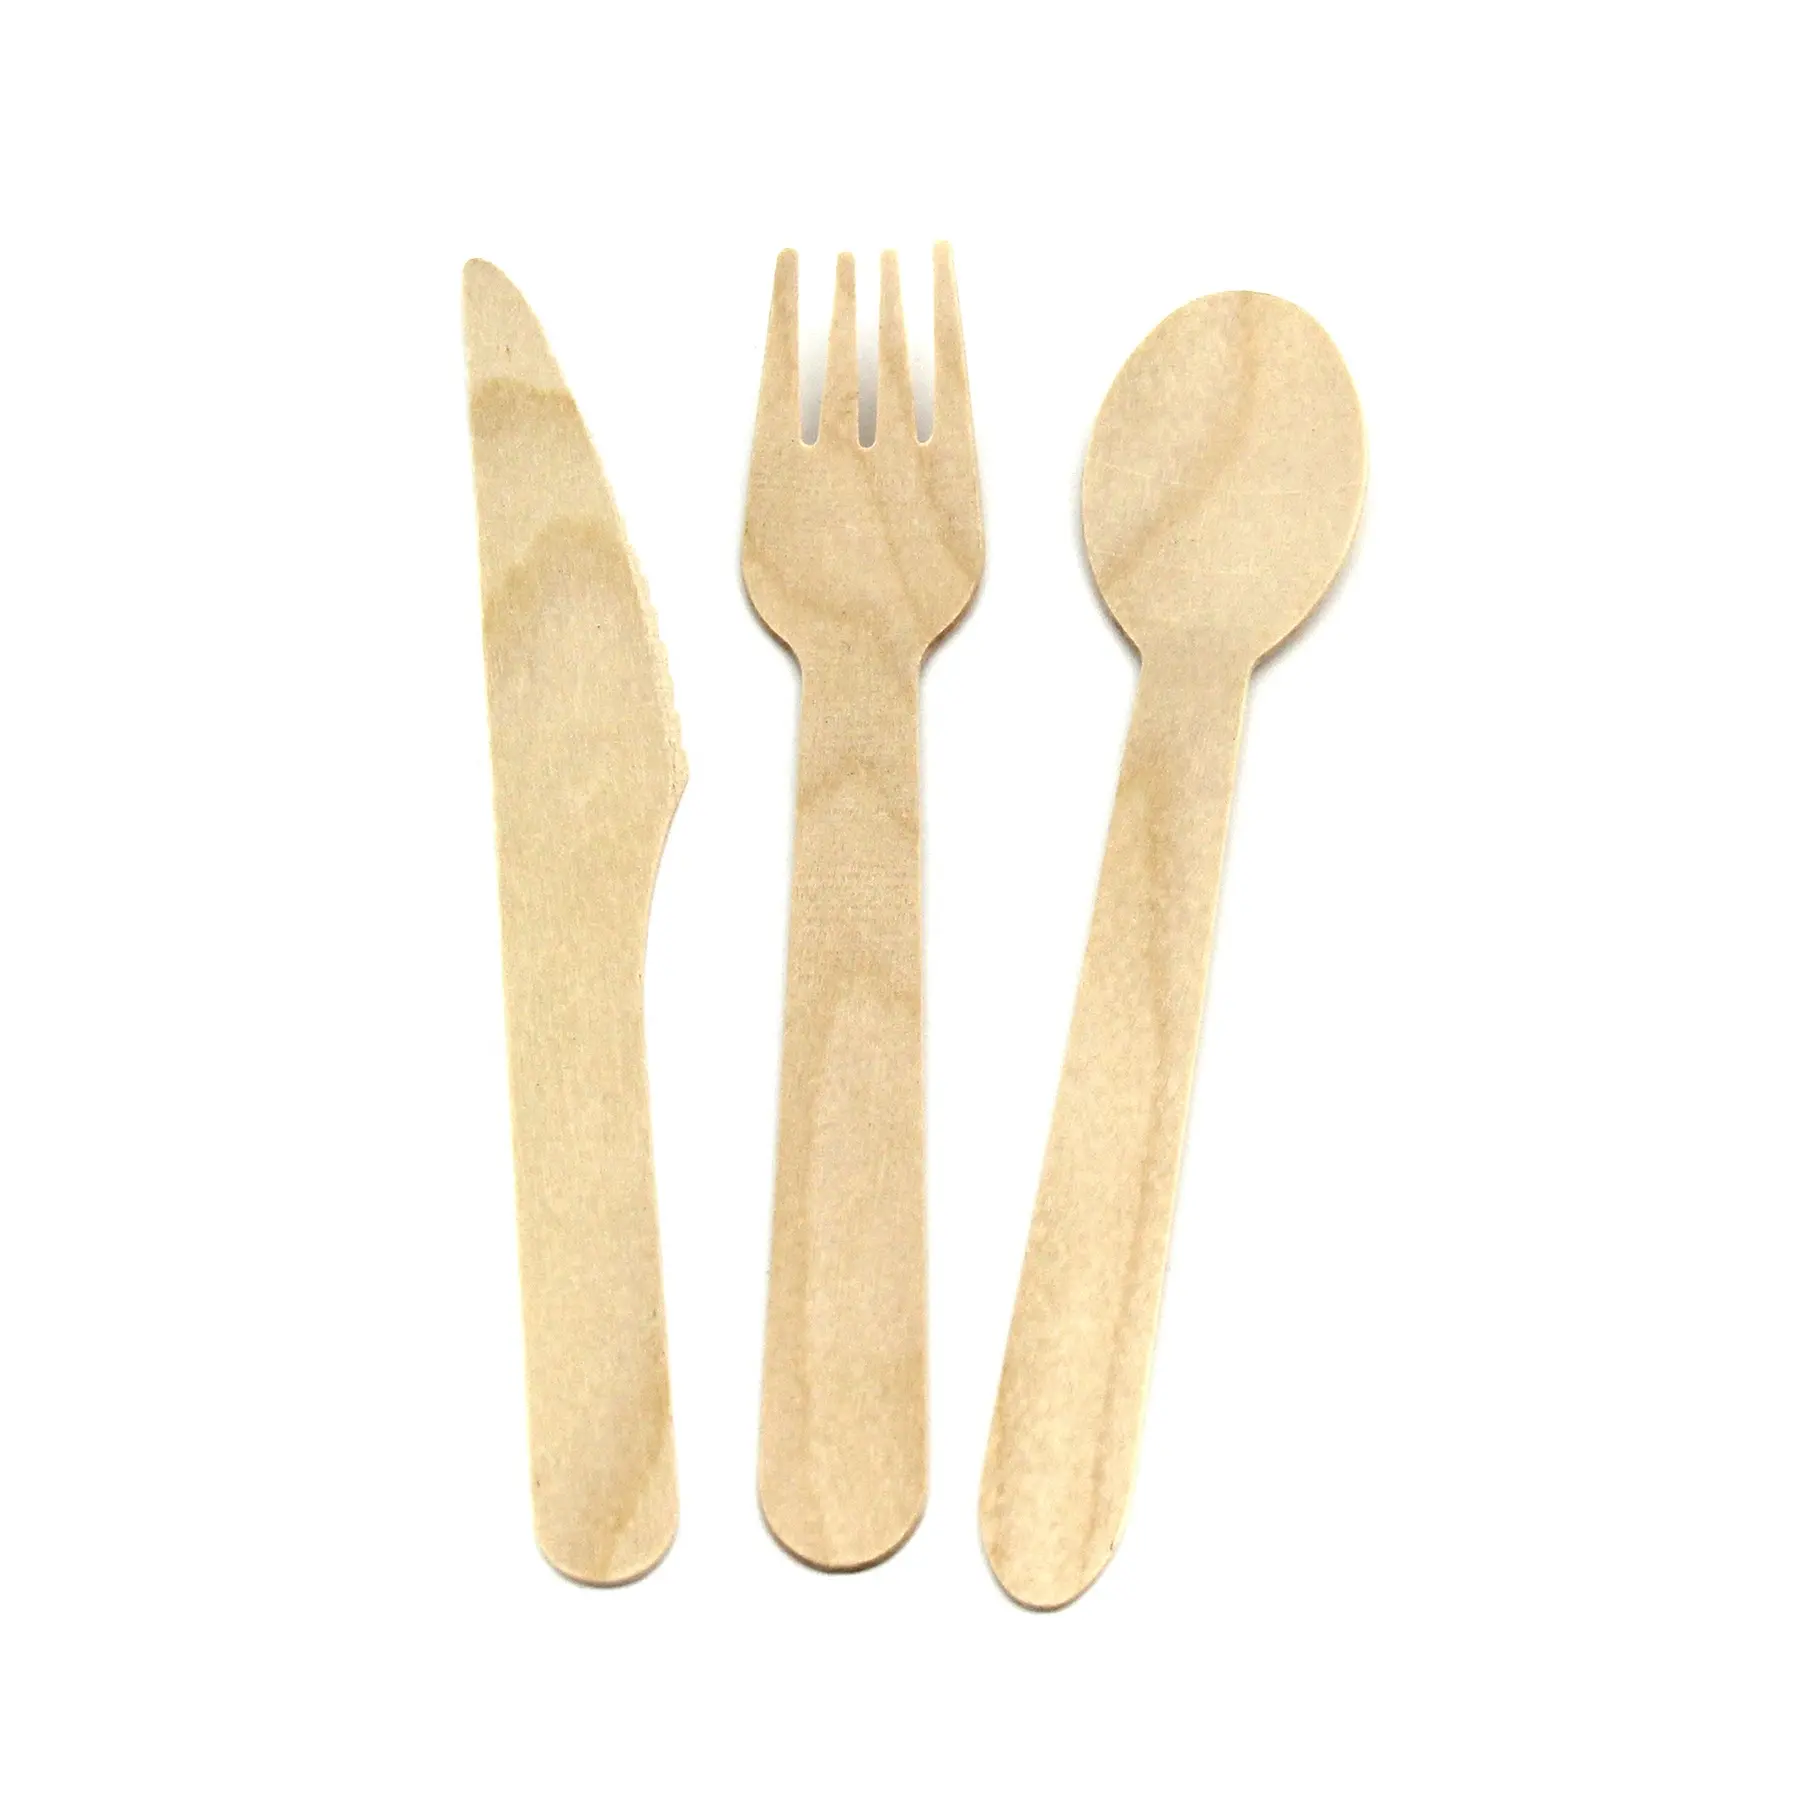 Excellent Quality 3 in 1 disposable cutlery set Biodegradable Natural Cutlery with brown tissue paper pack